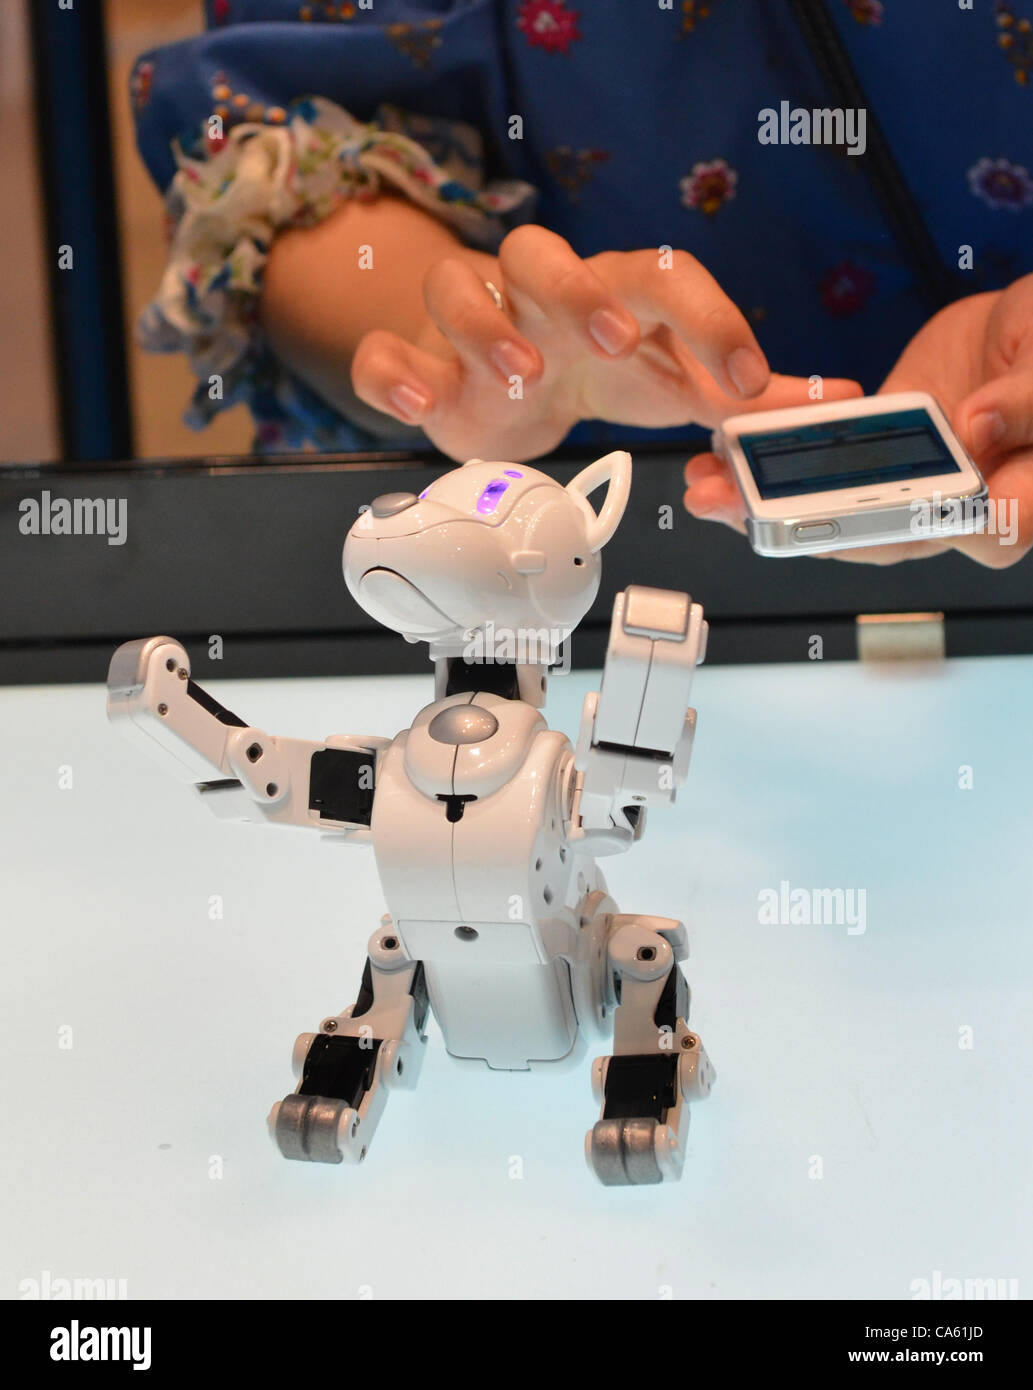 June 14, 2012, Tokyo, Japan - Takara Tomys robot dog, the Omnibot I-SODOG, is controlled by a smartphone during a demonstration at at the Tokyo Toy Show on Thursday, June 14, 2012, in Tokyo.  <br><br> Controlled by a smartphone, the robot moves like a real dog by utilizing 15 custom-designed servo m Stock Photo